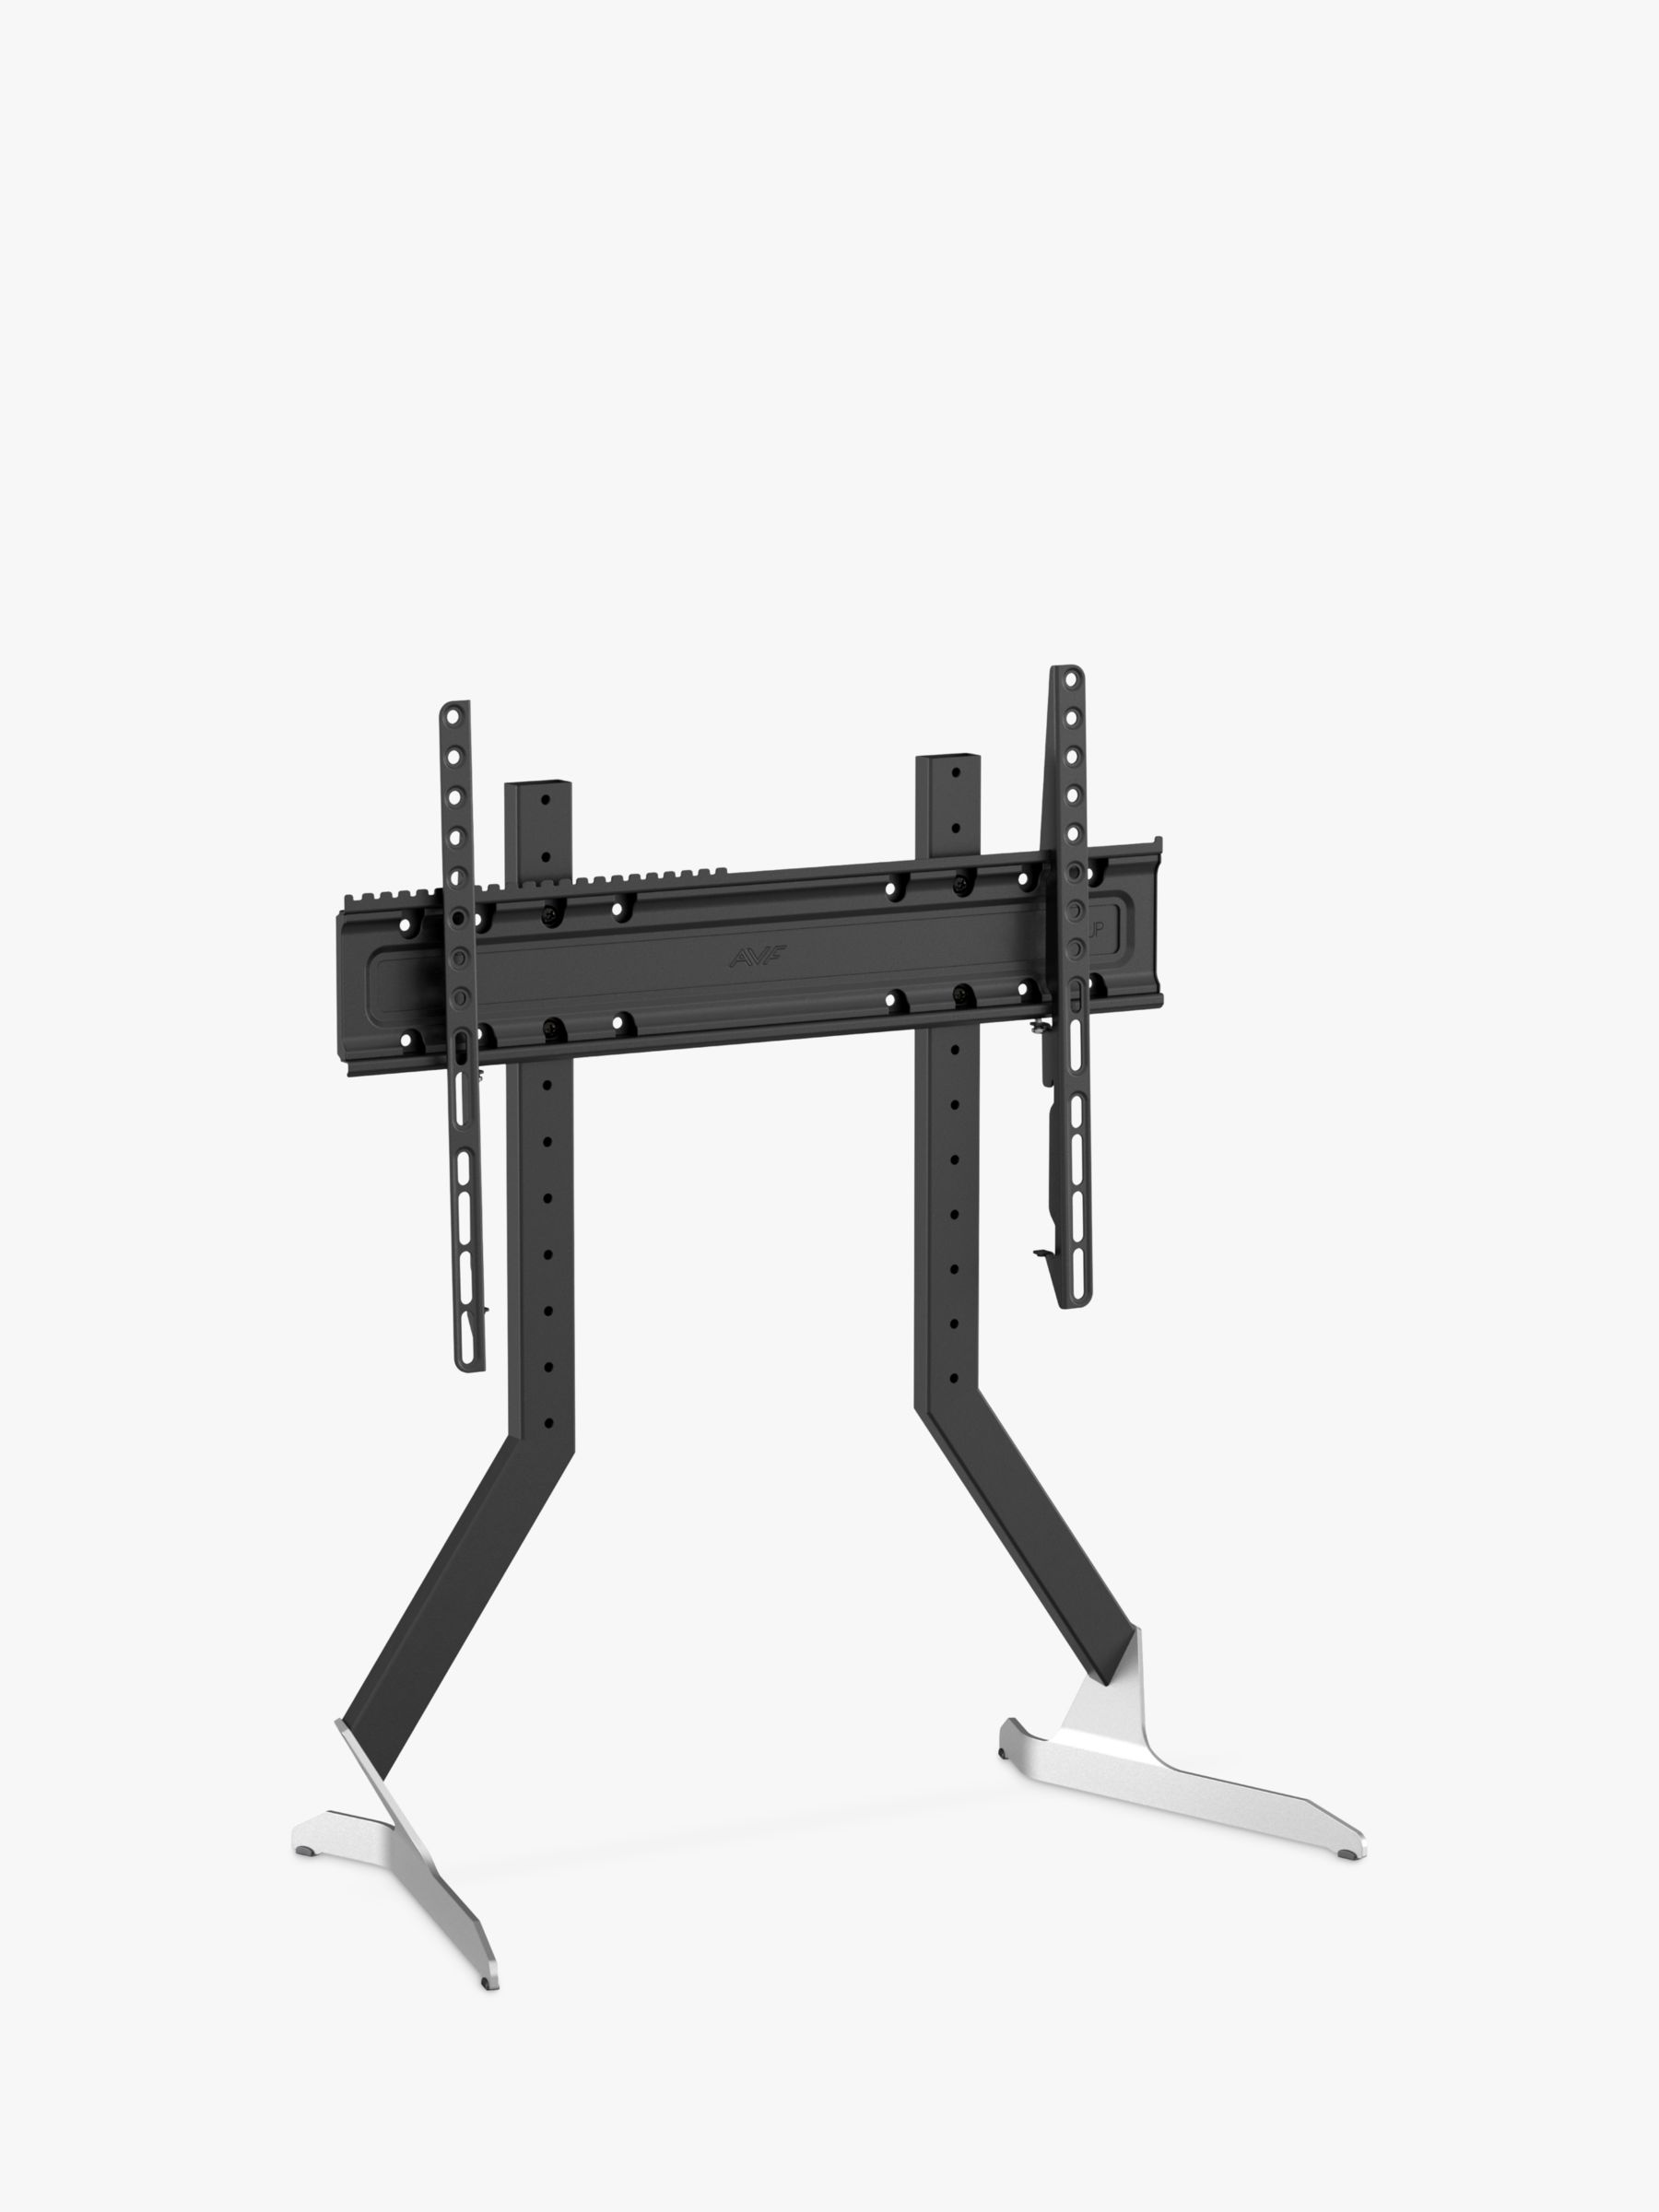 Photo of Avf qb600s replacement tv stand with bracket for tvs from 55” to 100” black/silver